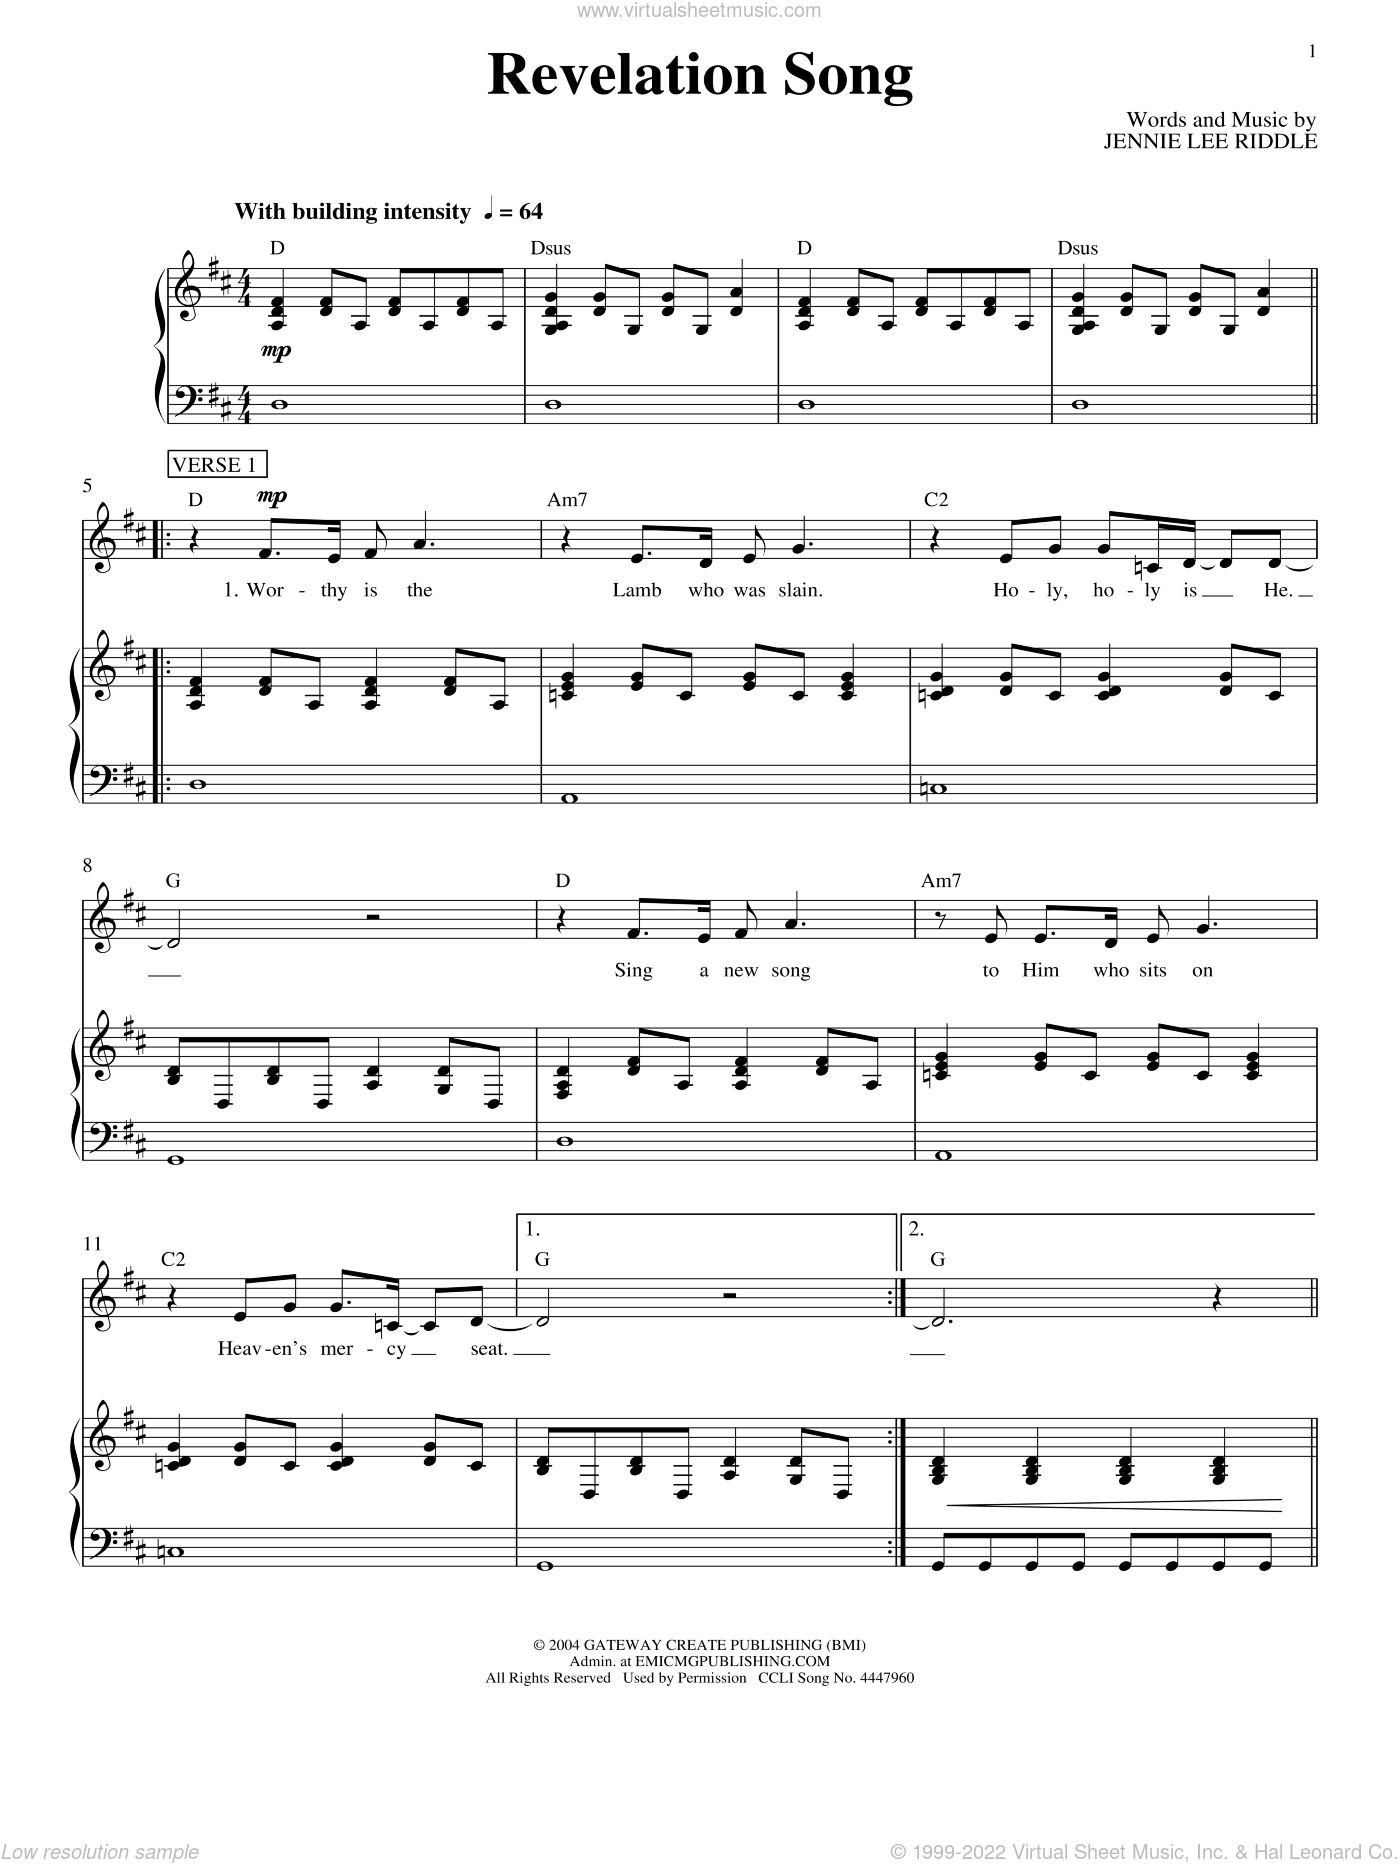 Revelation Song (Big Note Piano) - Print Sheet Music Now